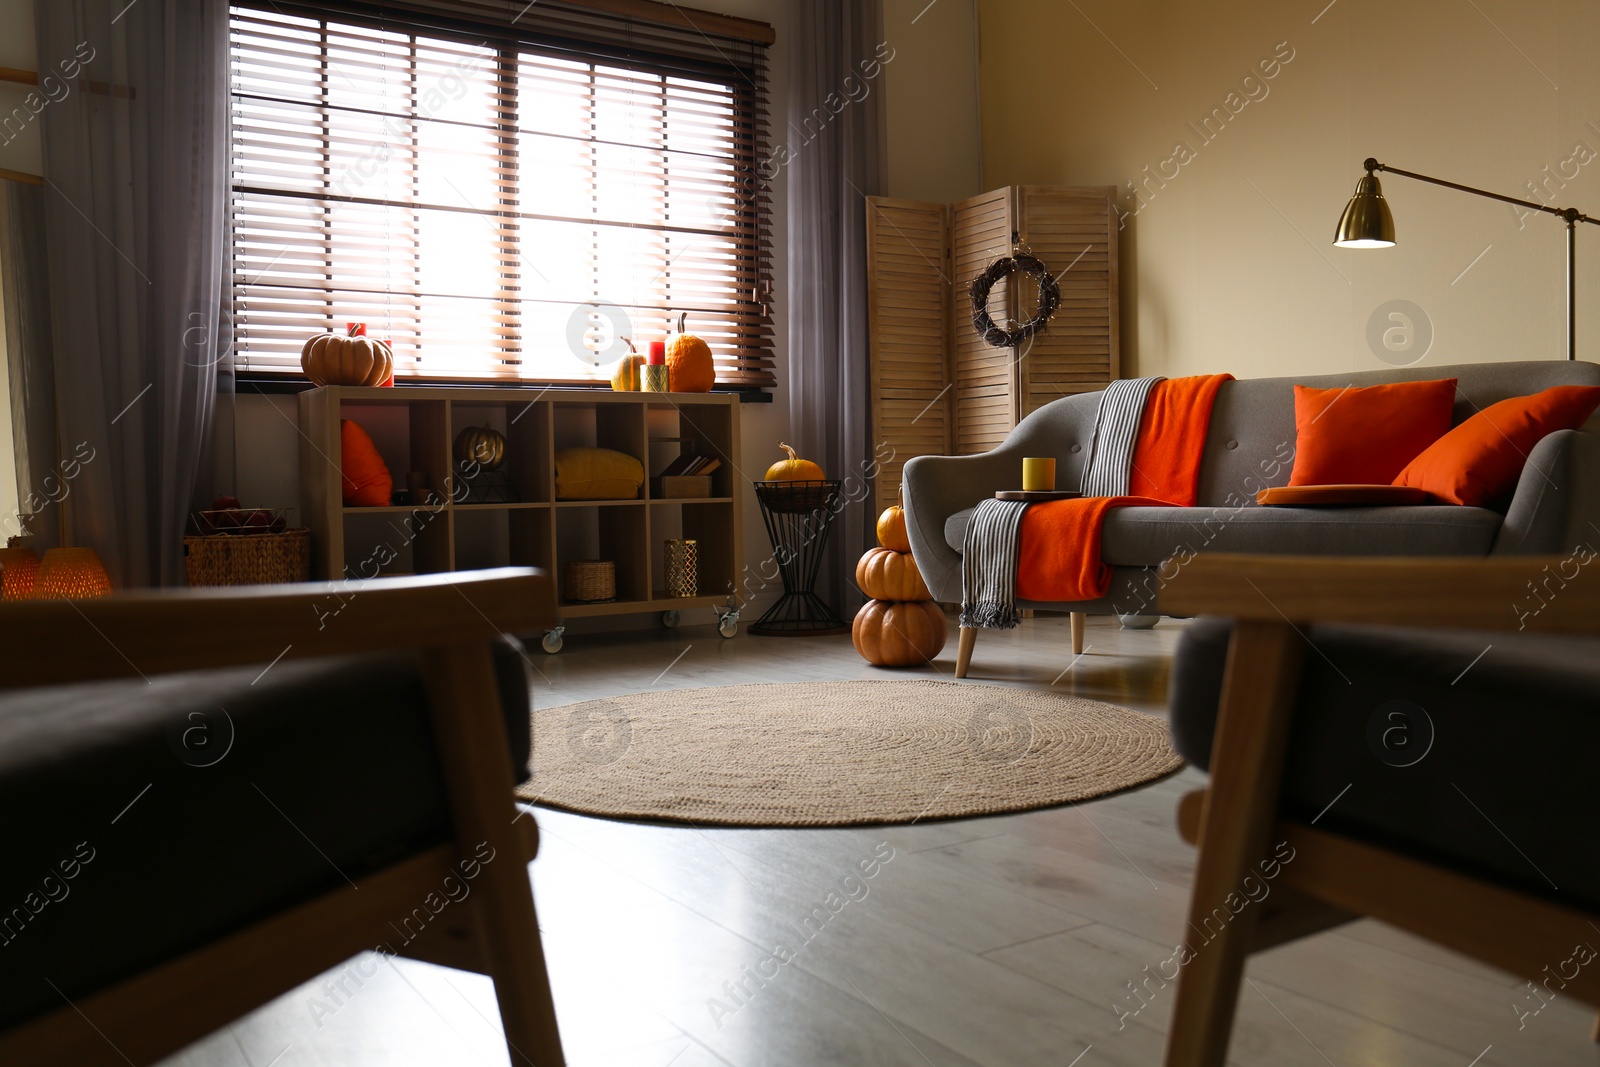 Photo of Cozy living room interior inspired by autumn colors